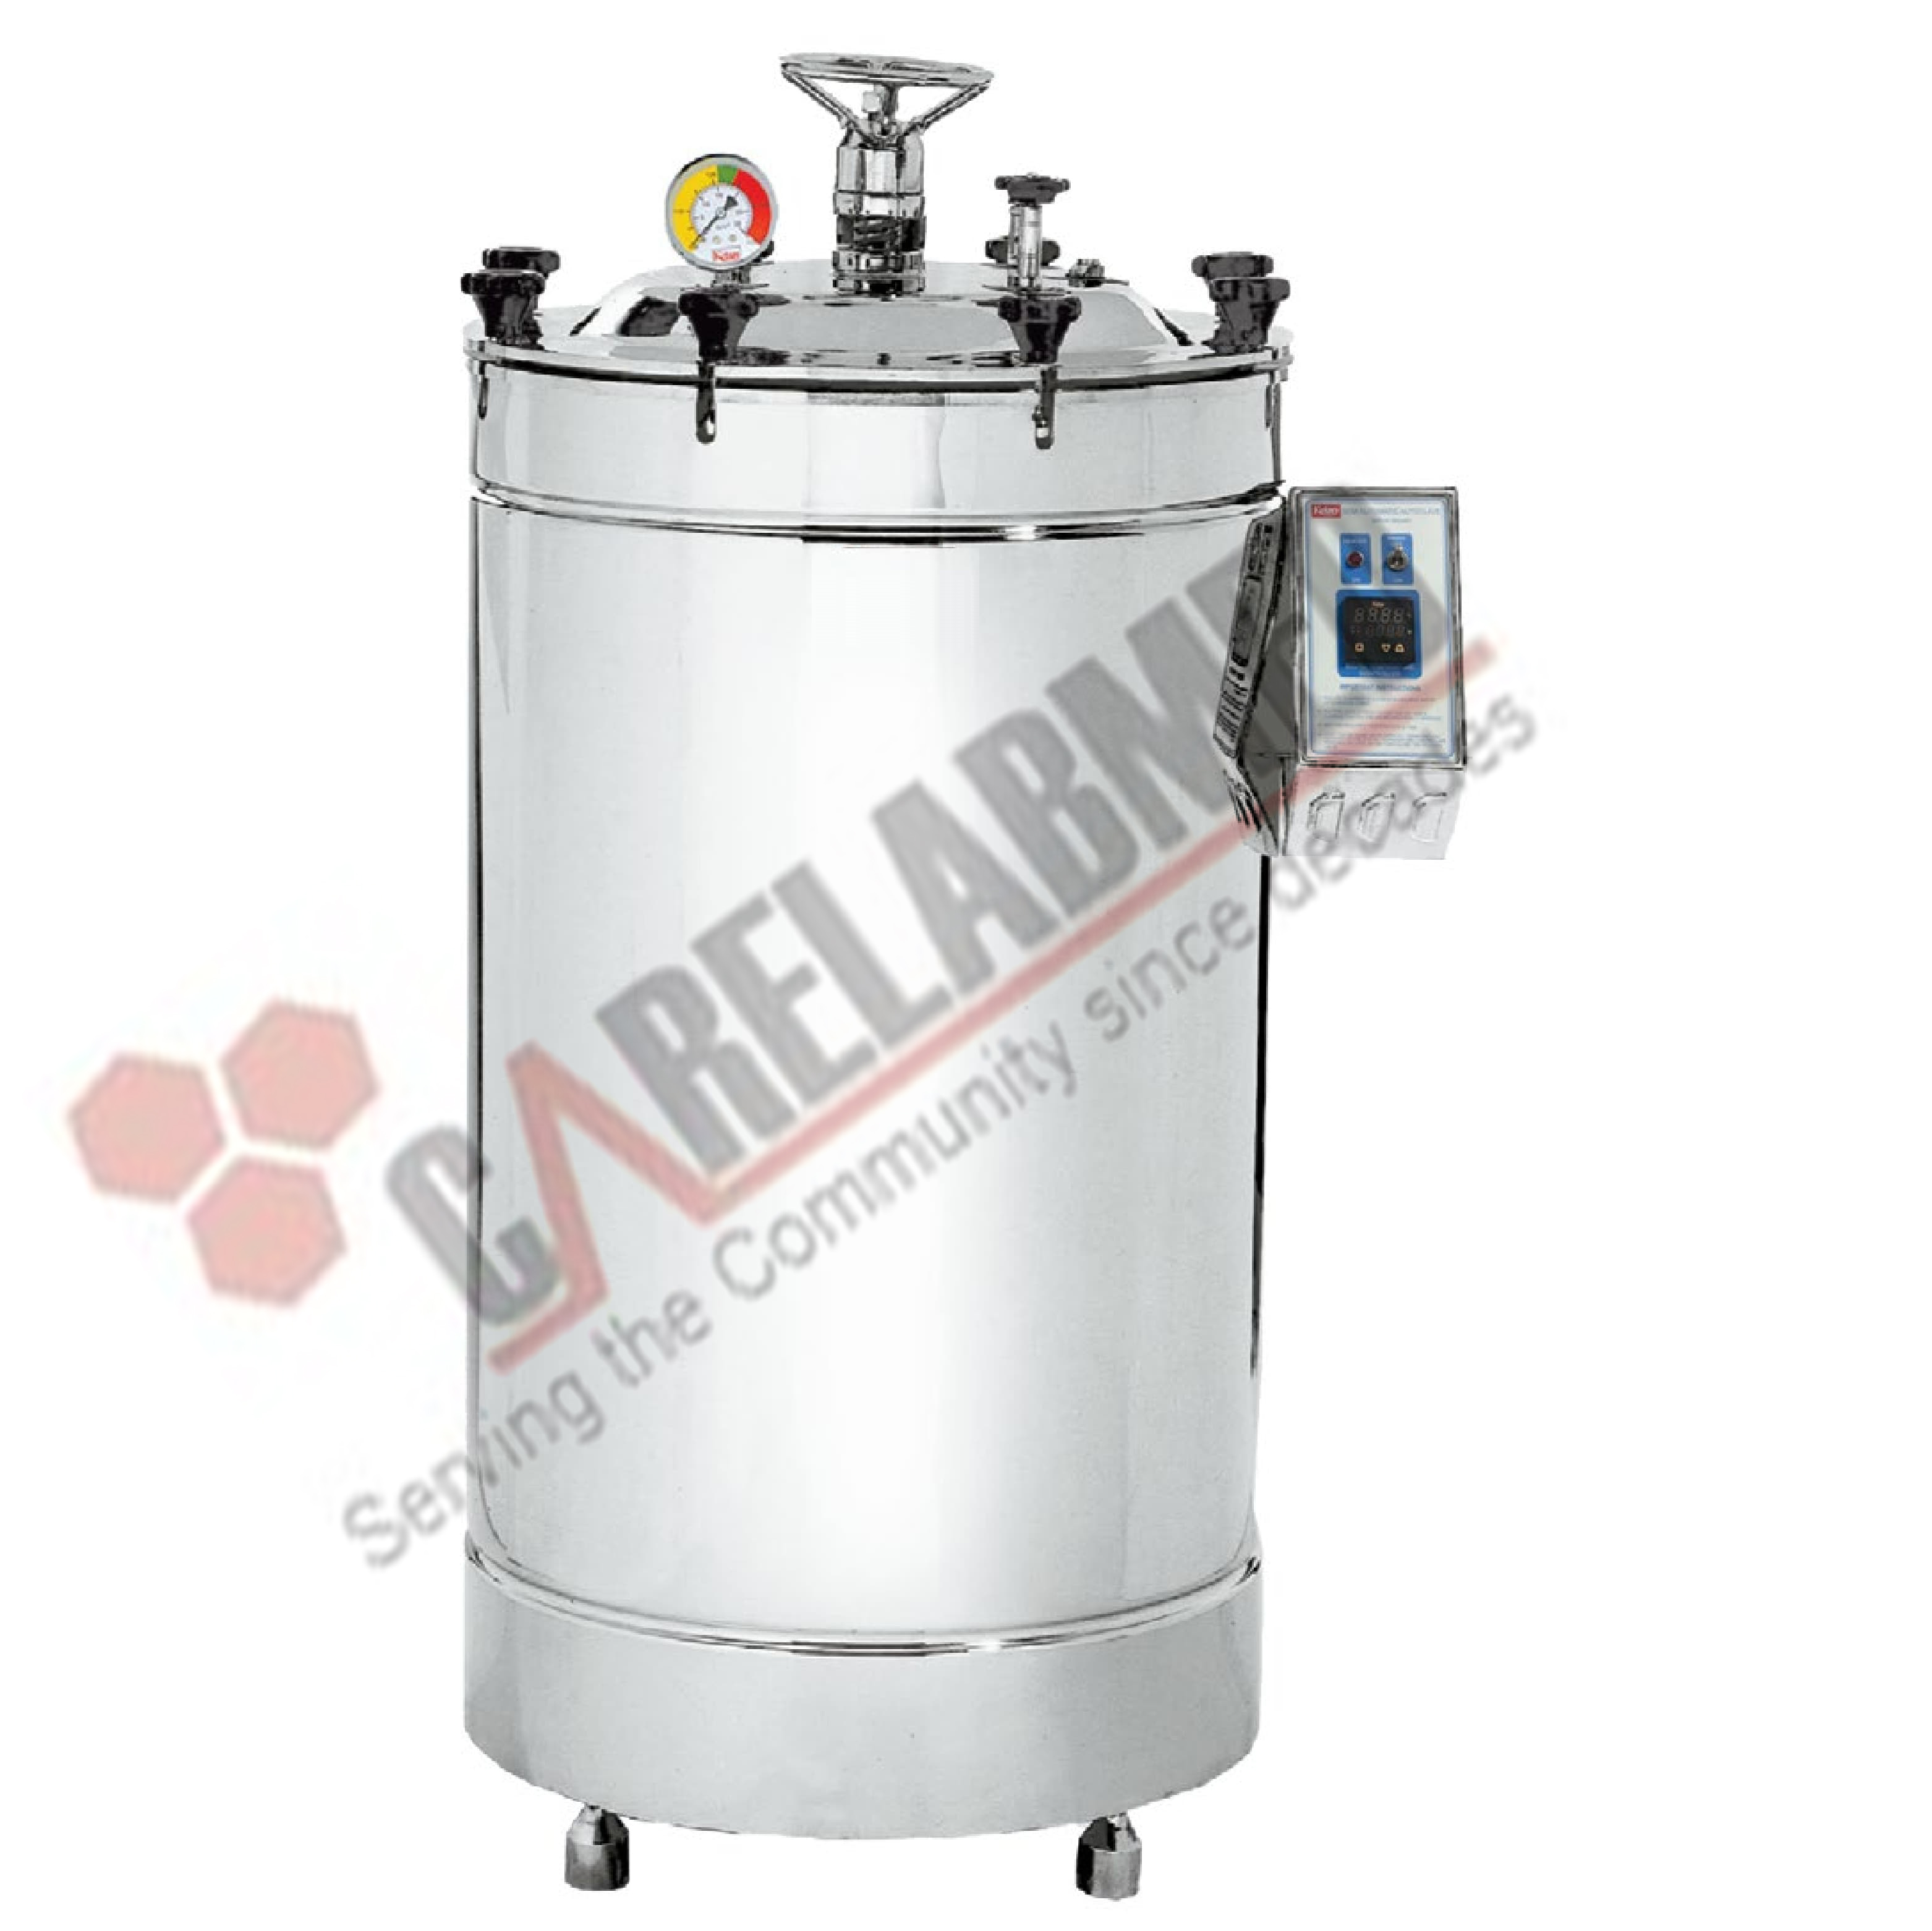 admin/assets/img/sub-category/Autoclave gmp compliant.jpg